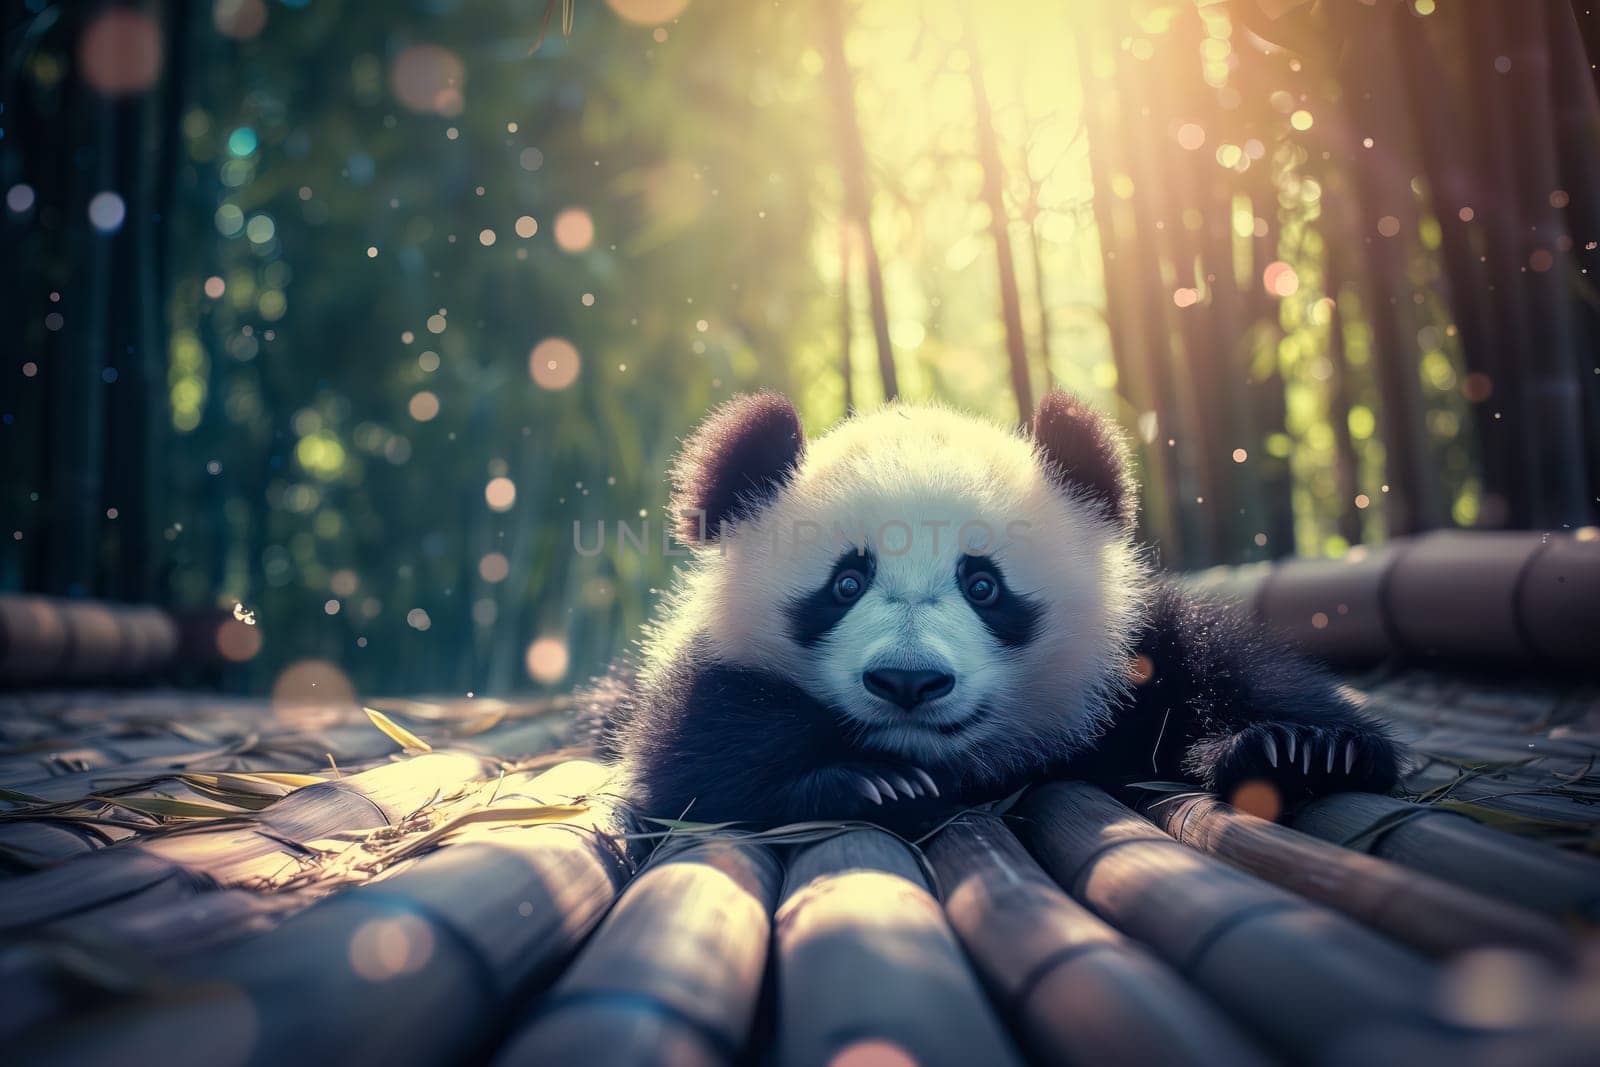 Cute panda cub in a lush bamboo grove, The image showcases the beauty and serenity of nature and wildlife. Endangered species